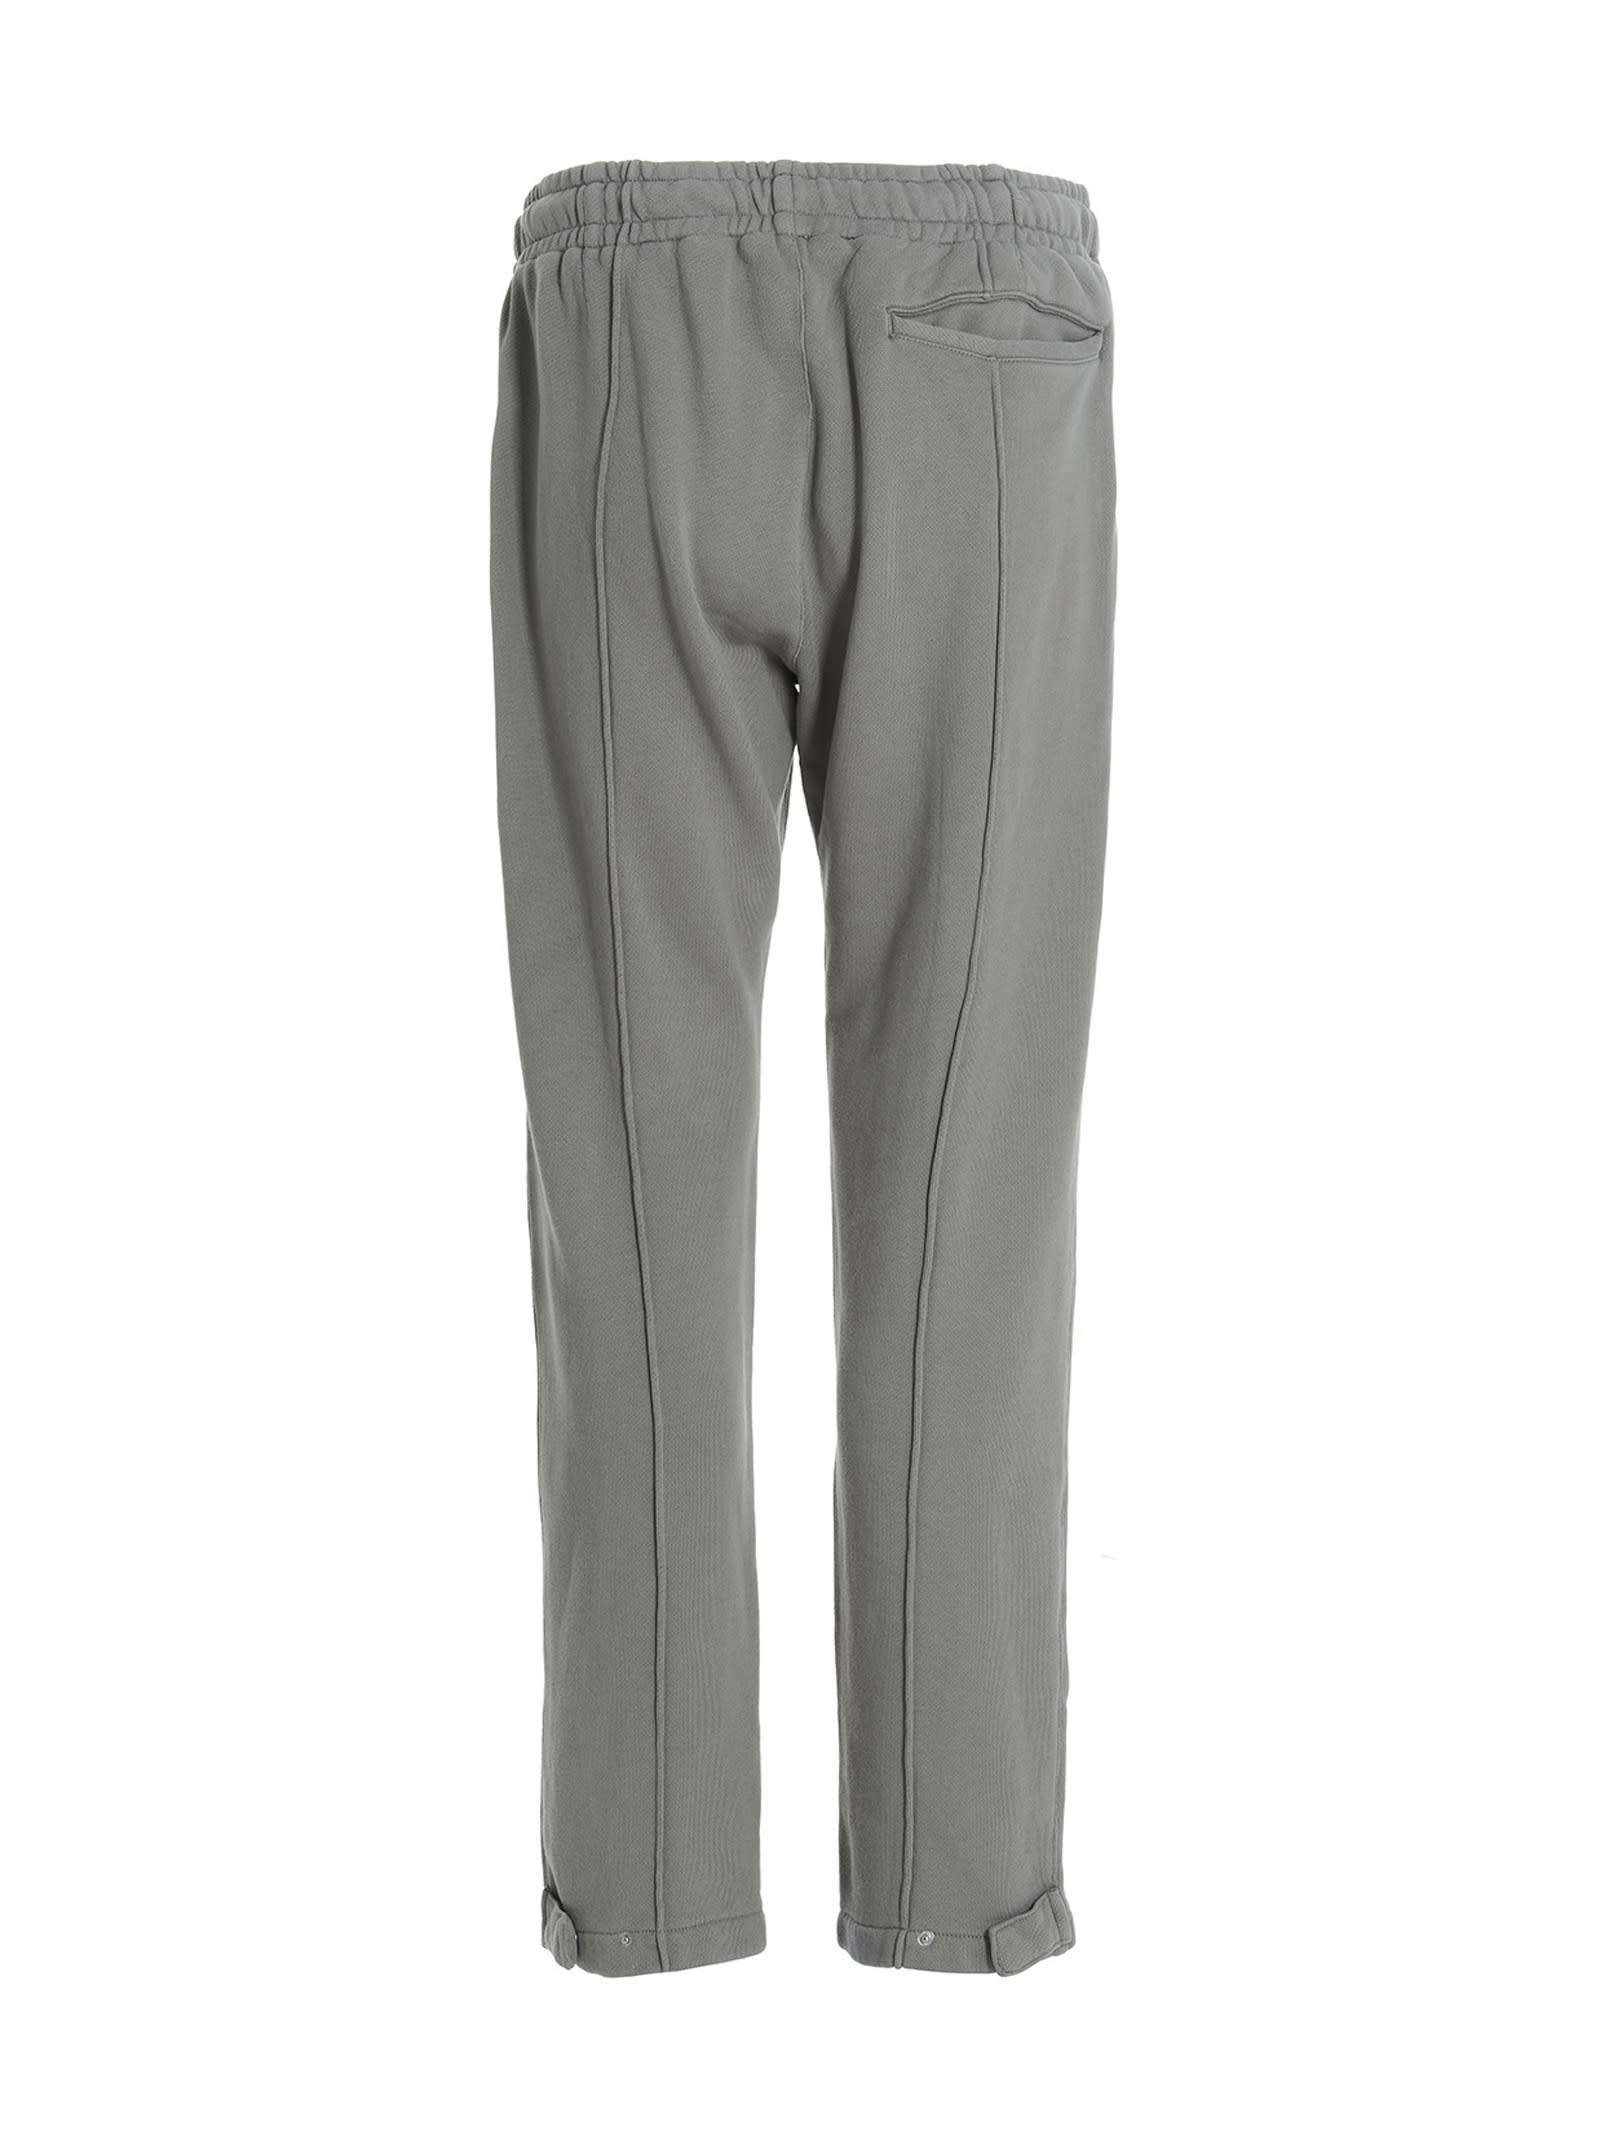 Shop Stampd Palm Crest Joggers In Gray